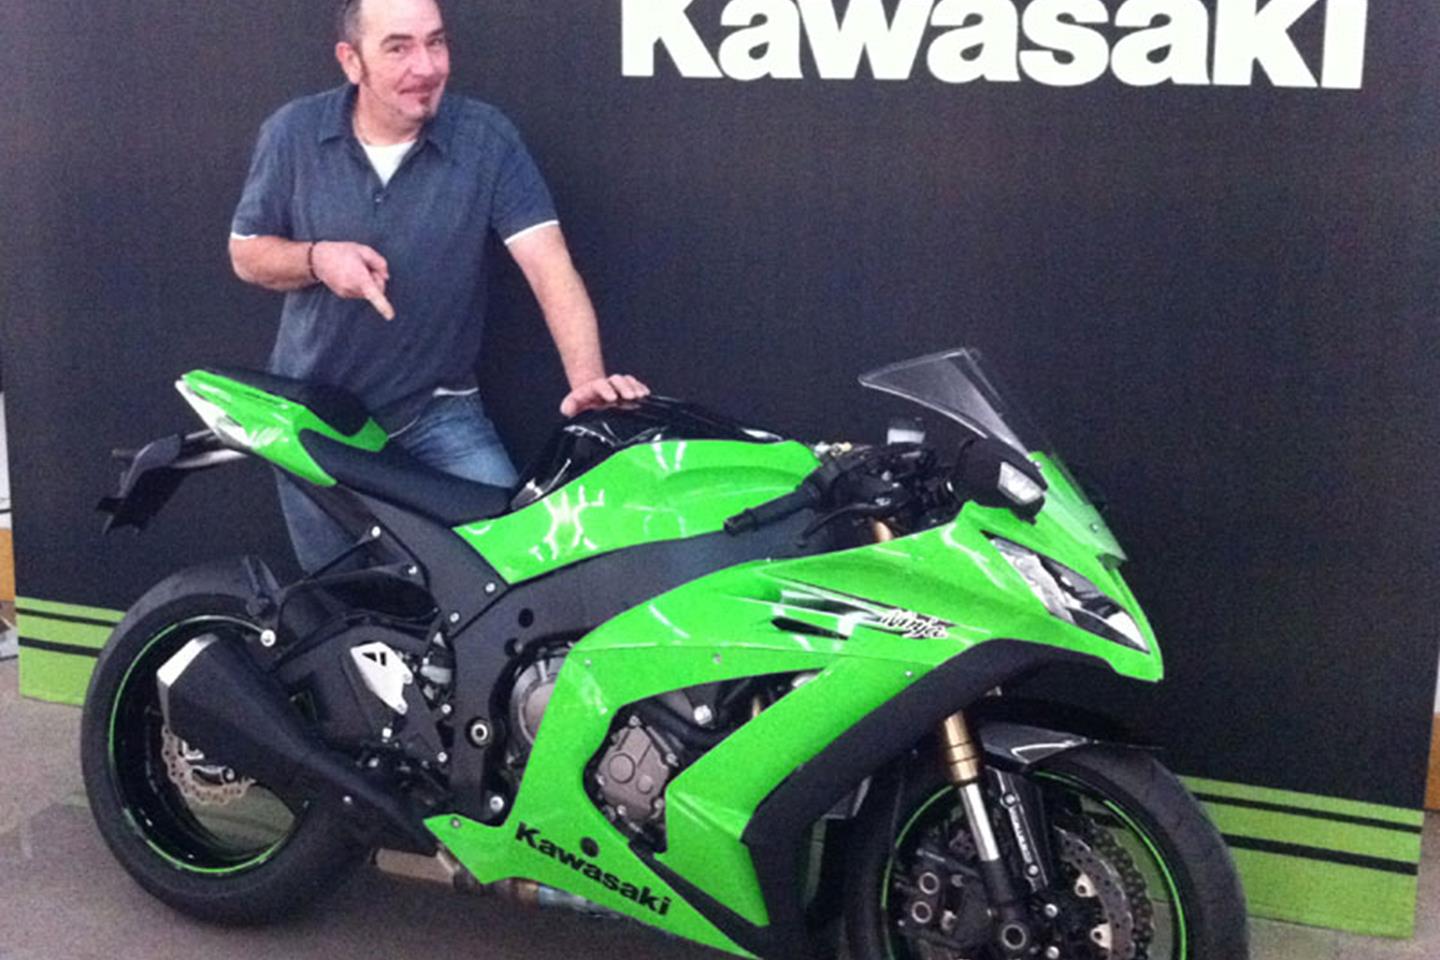 2011 Kawasaki ZX-10R first ride - 'much more linear power delivery 